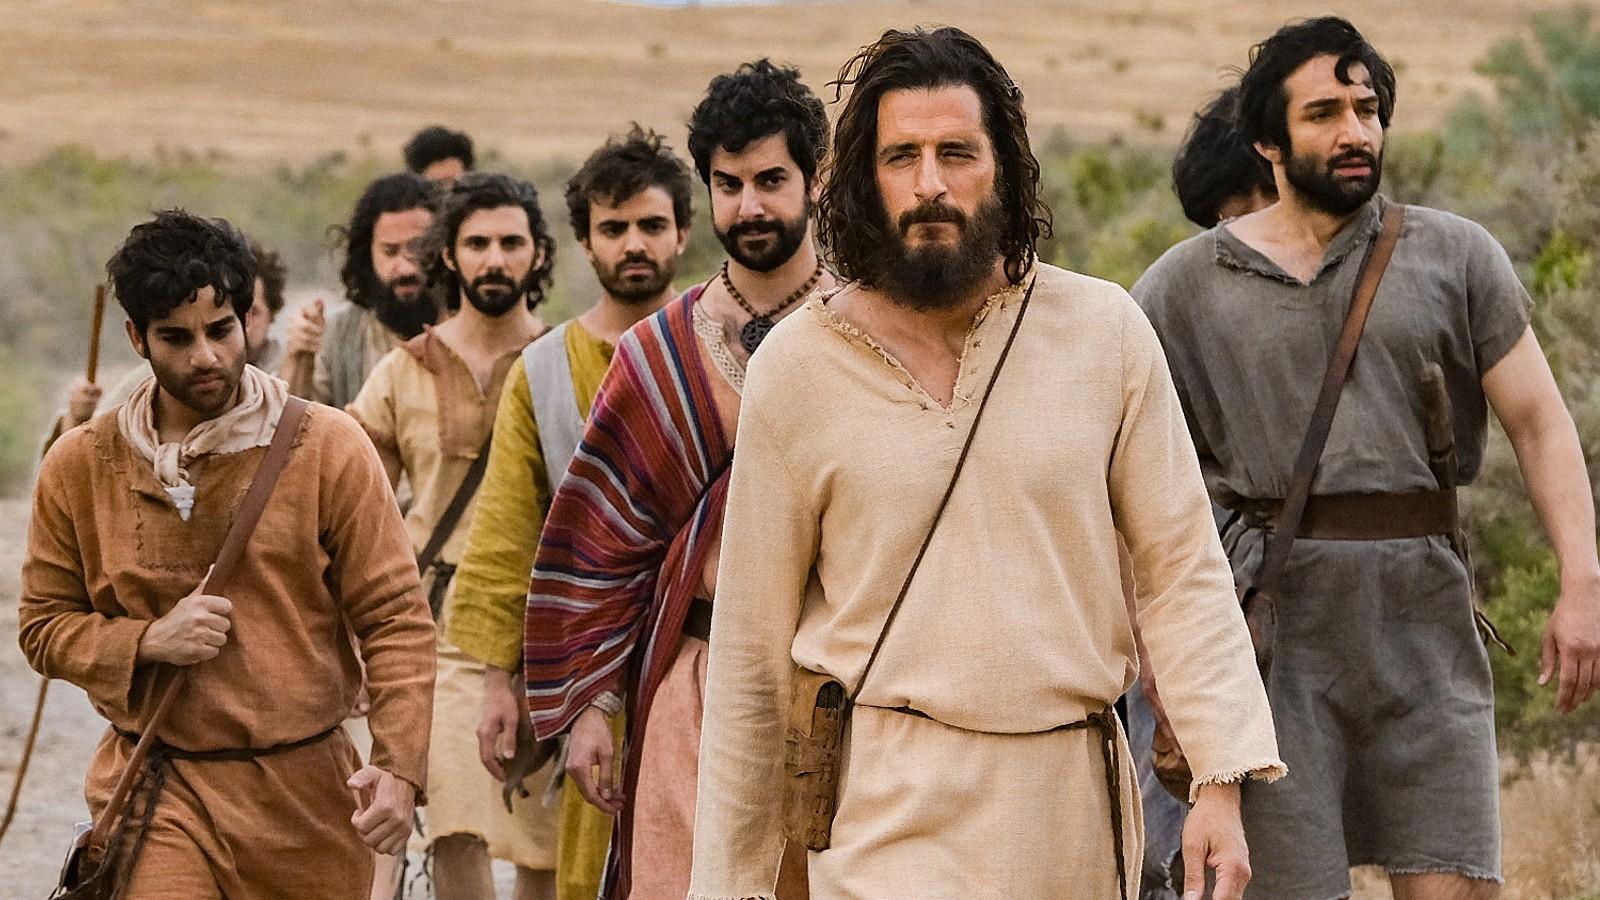 Jesus and other characters in The Chosen cast